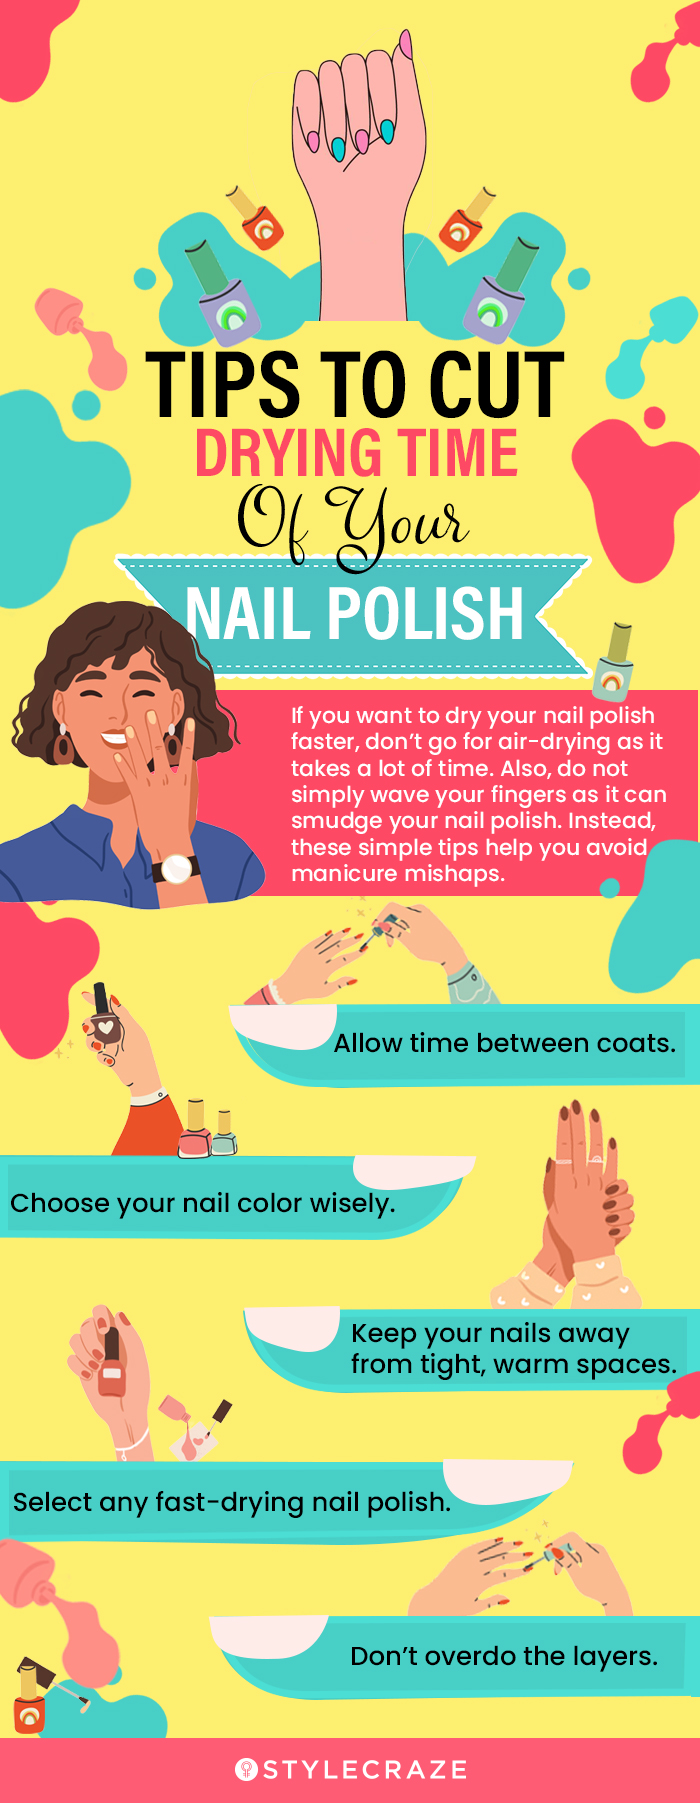 tips to cut drying time of your nail polish [infographic]